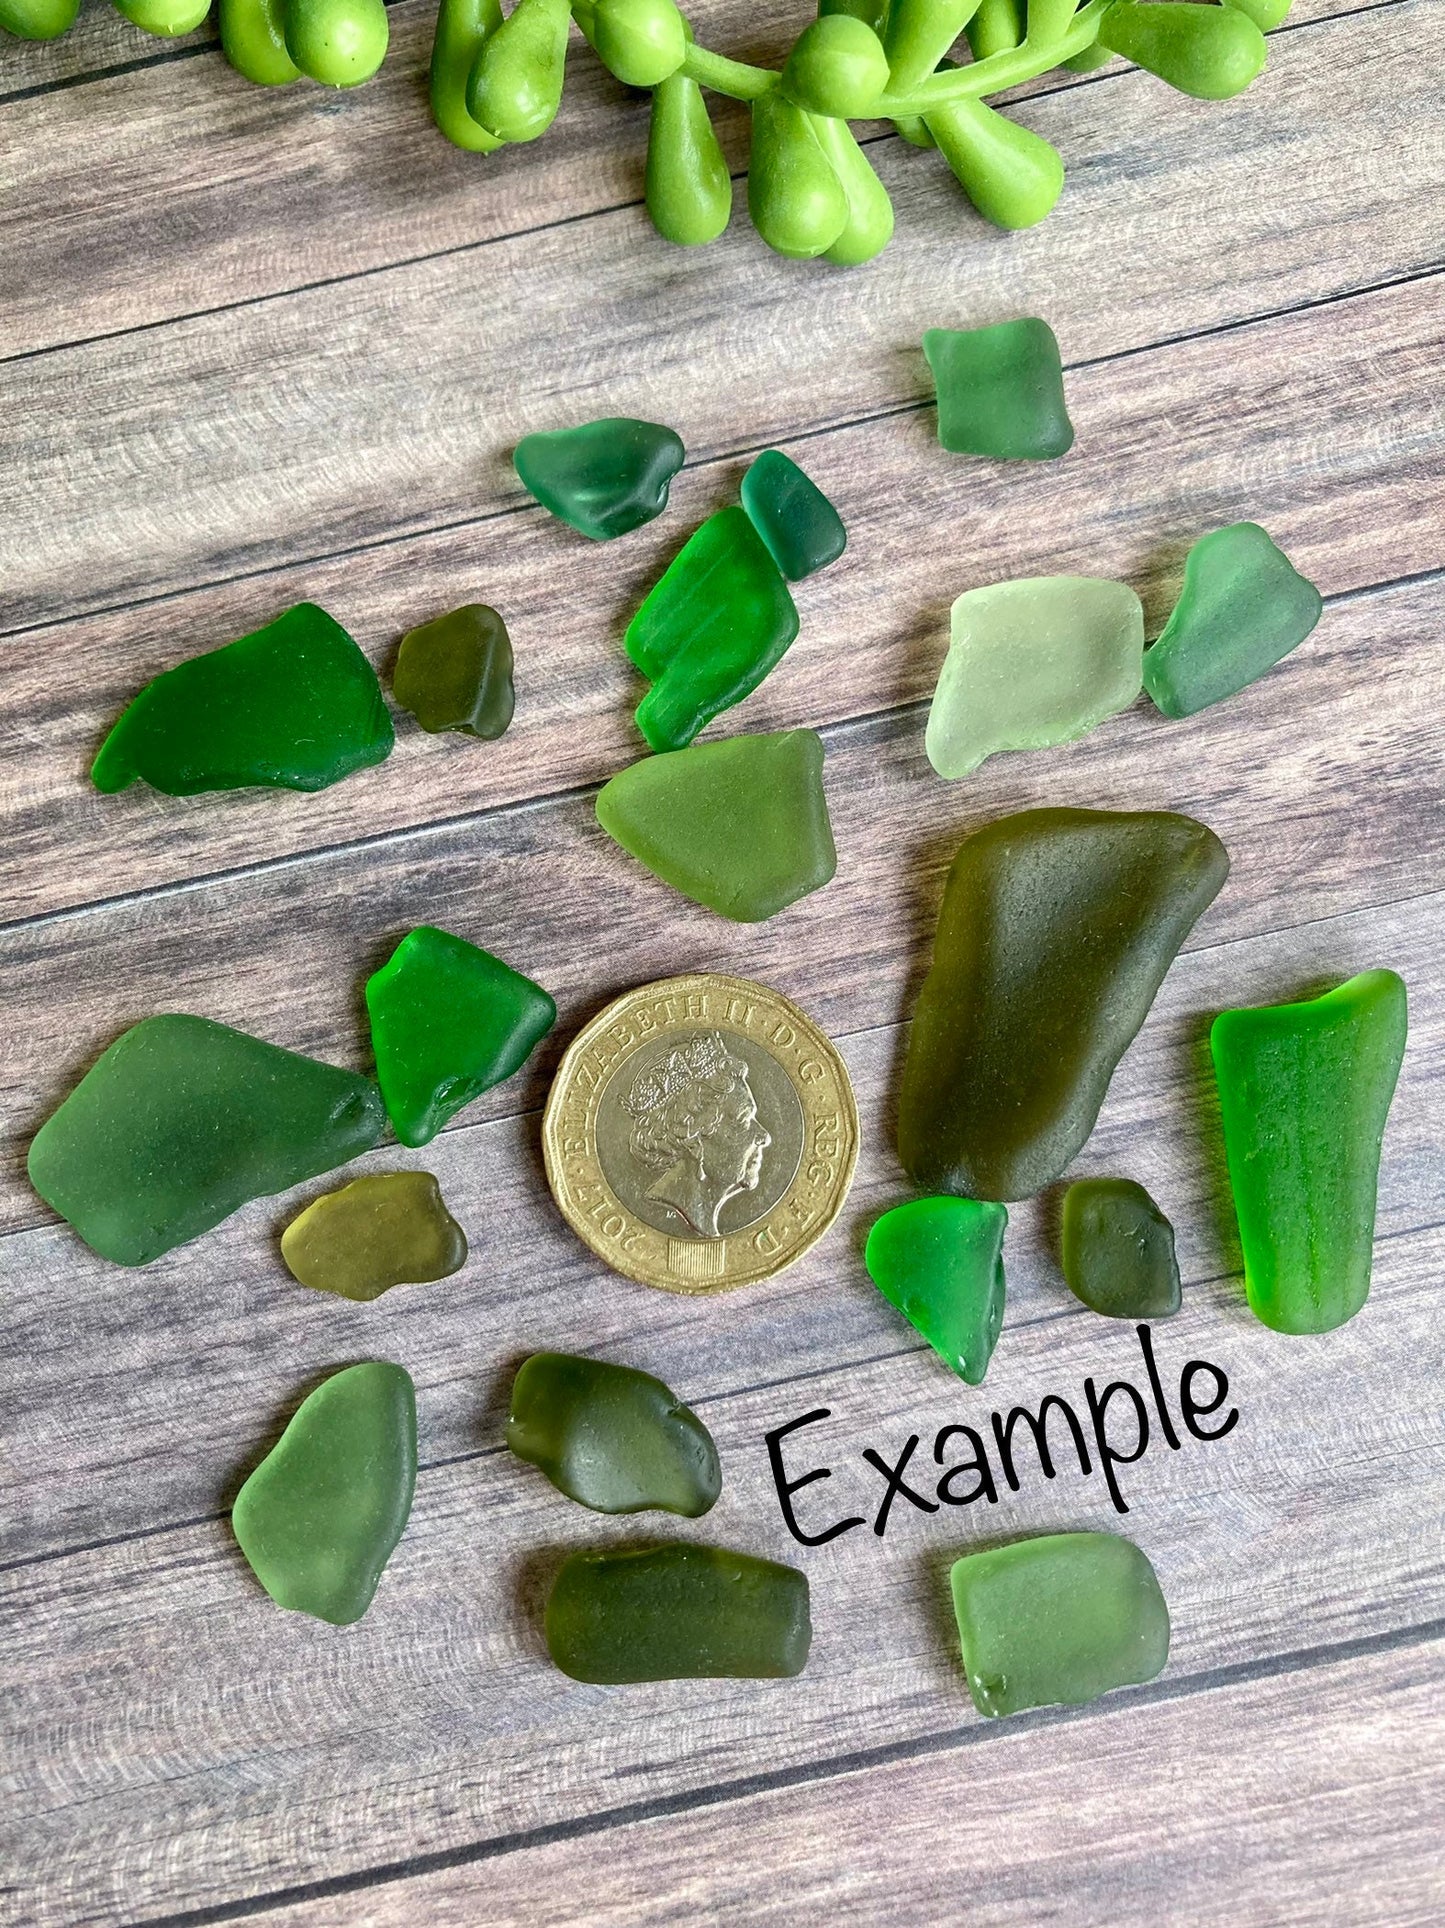 Green sea glass 20 pieces/beach glass collected from Queensferry beach Scotland in 2022